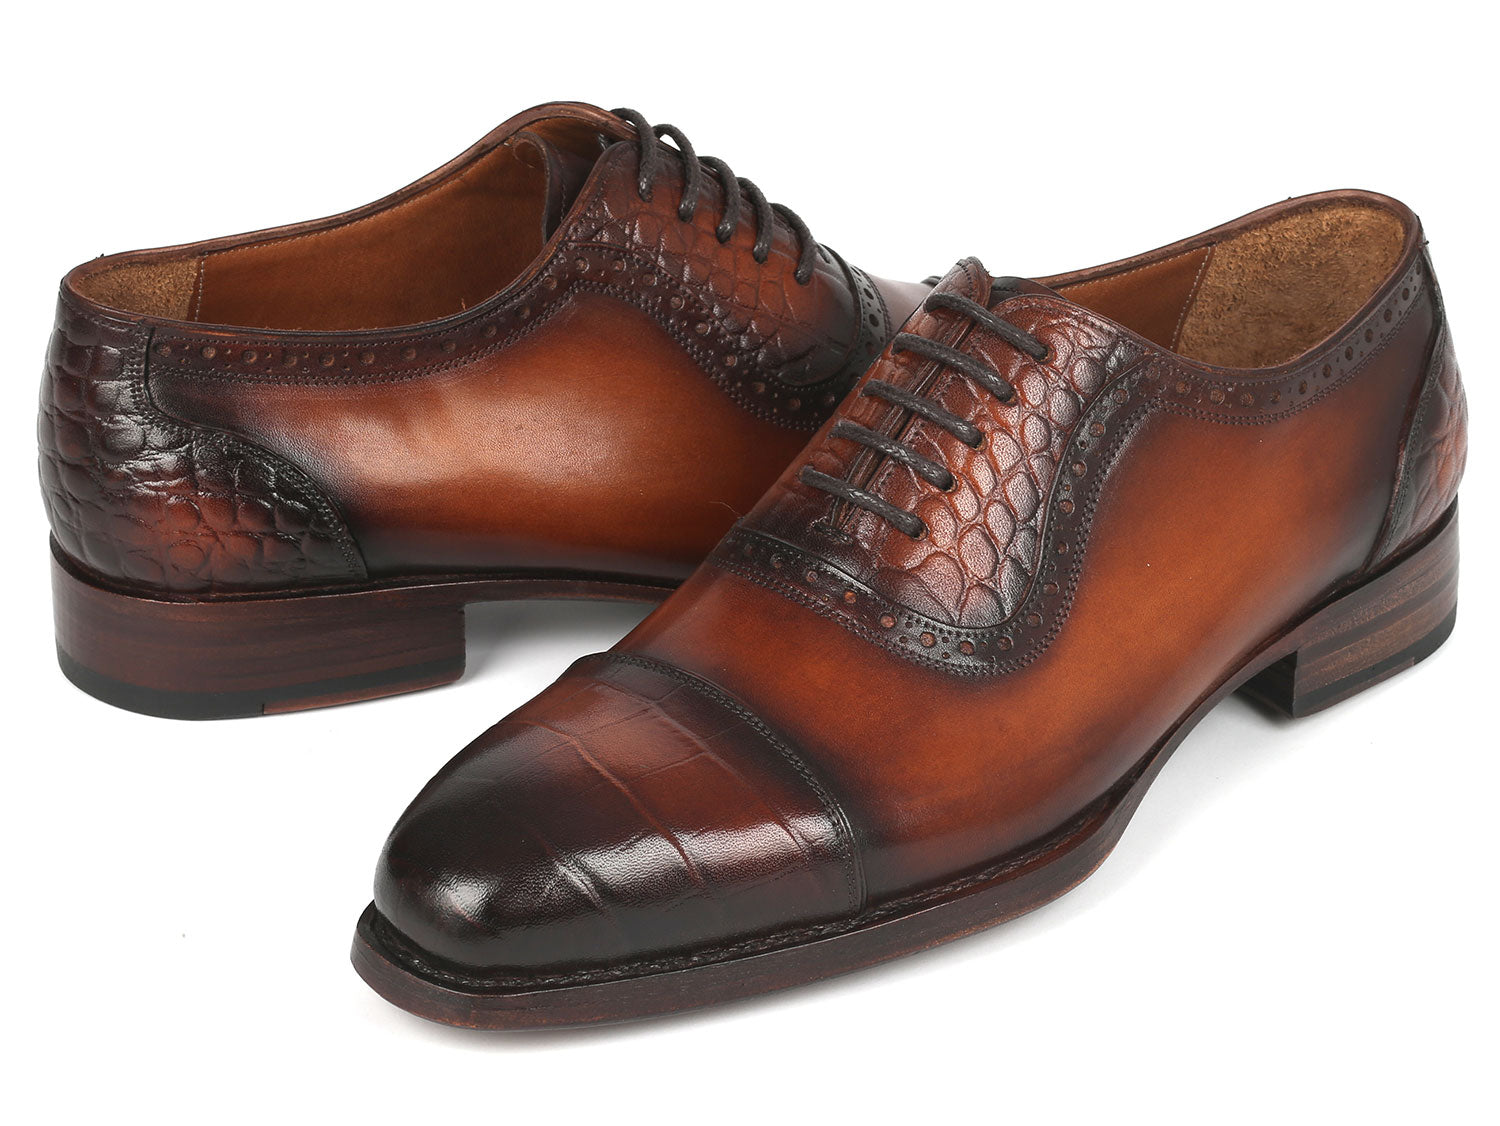 Paul Parkman Goodyear Welted Cap Toe Oxfords Brown - 9482-BRW